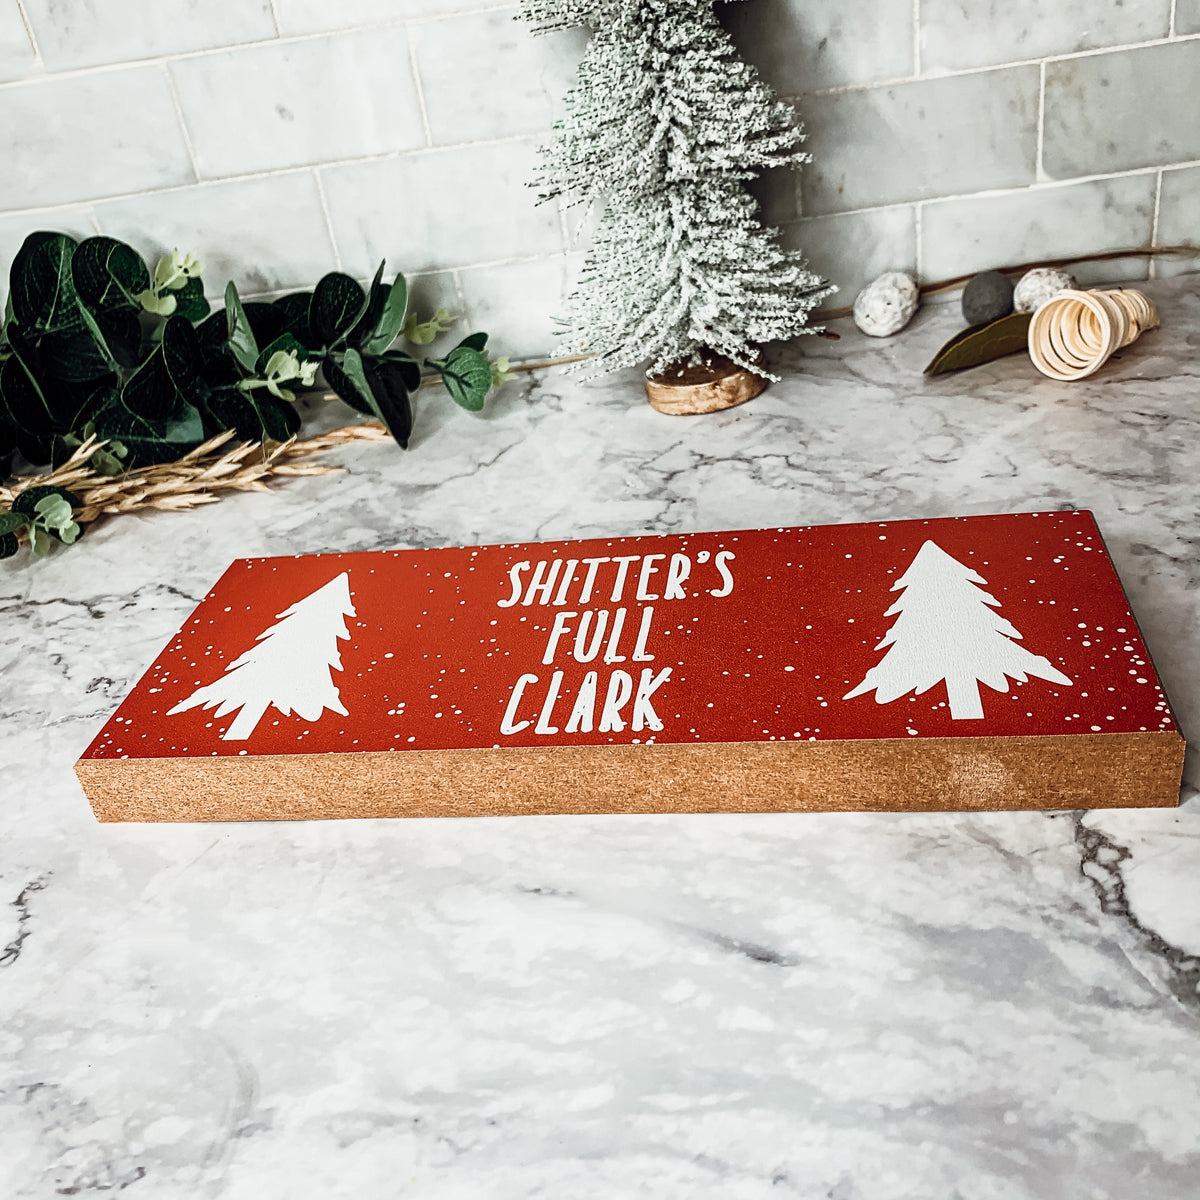 Funny CHristmas Signs for Home Decorations and Gifts